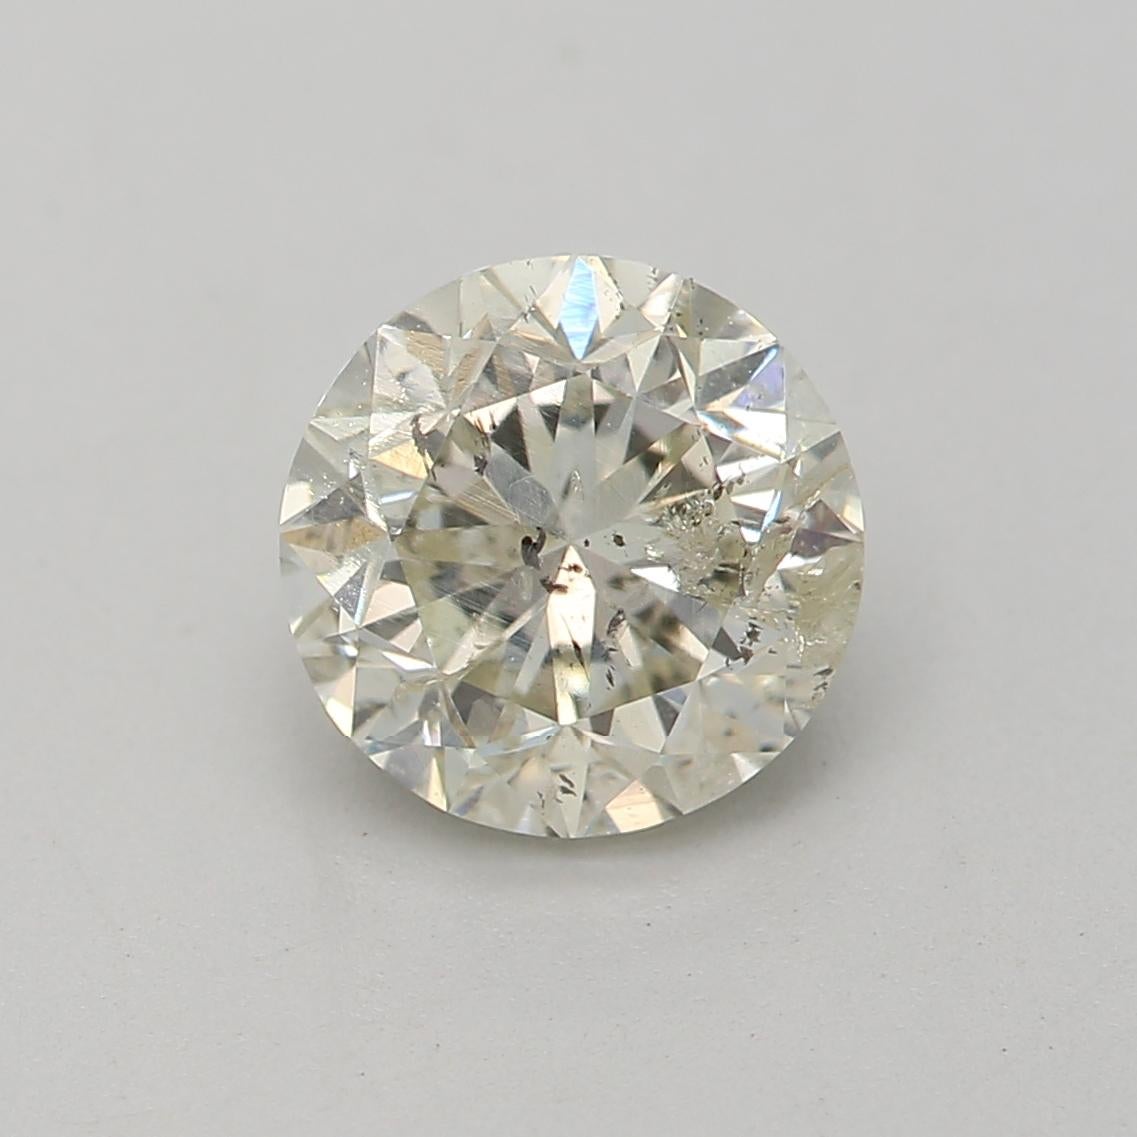 *100% NATURAL FANCY COLOUR DIAMOND*

✪ Diamond Details ✪

➛ Shape: Round
➛ Colour Grade: M
➛ Carat: 0.94
➛ Clarity: I2
➛ GIA Certified 

^FEATURES OF THE DIAMOND^

Our 0.94-carat diamond falls within the range of smaller to medium-sized diamonds.